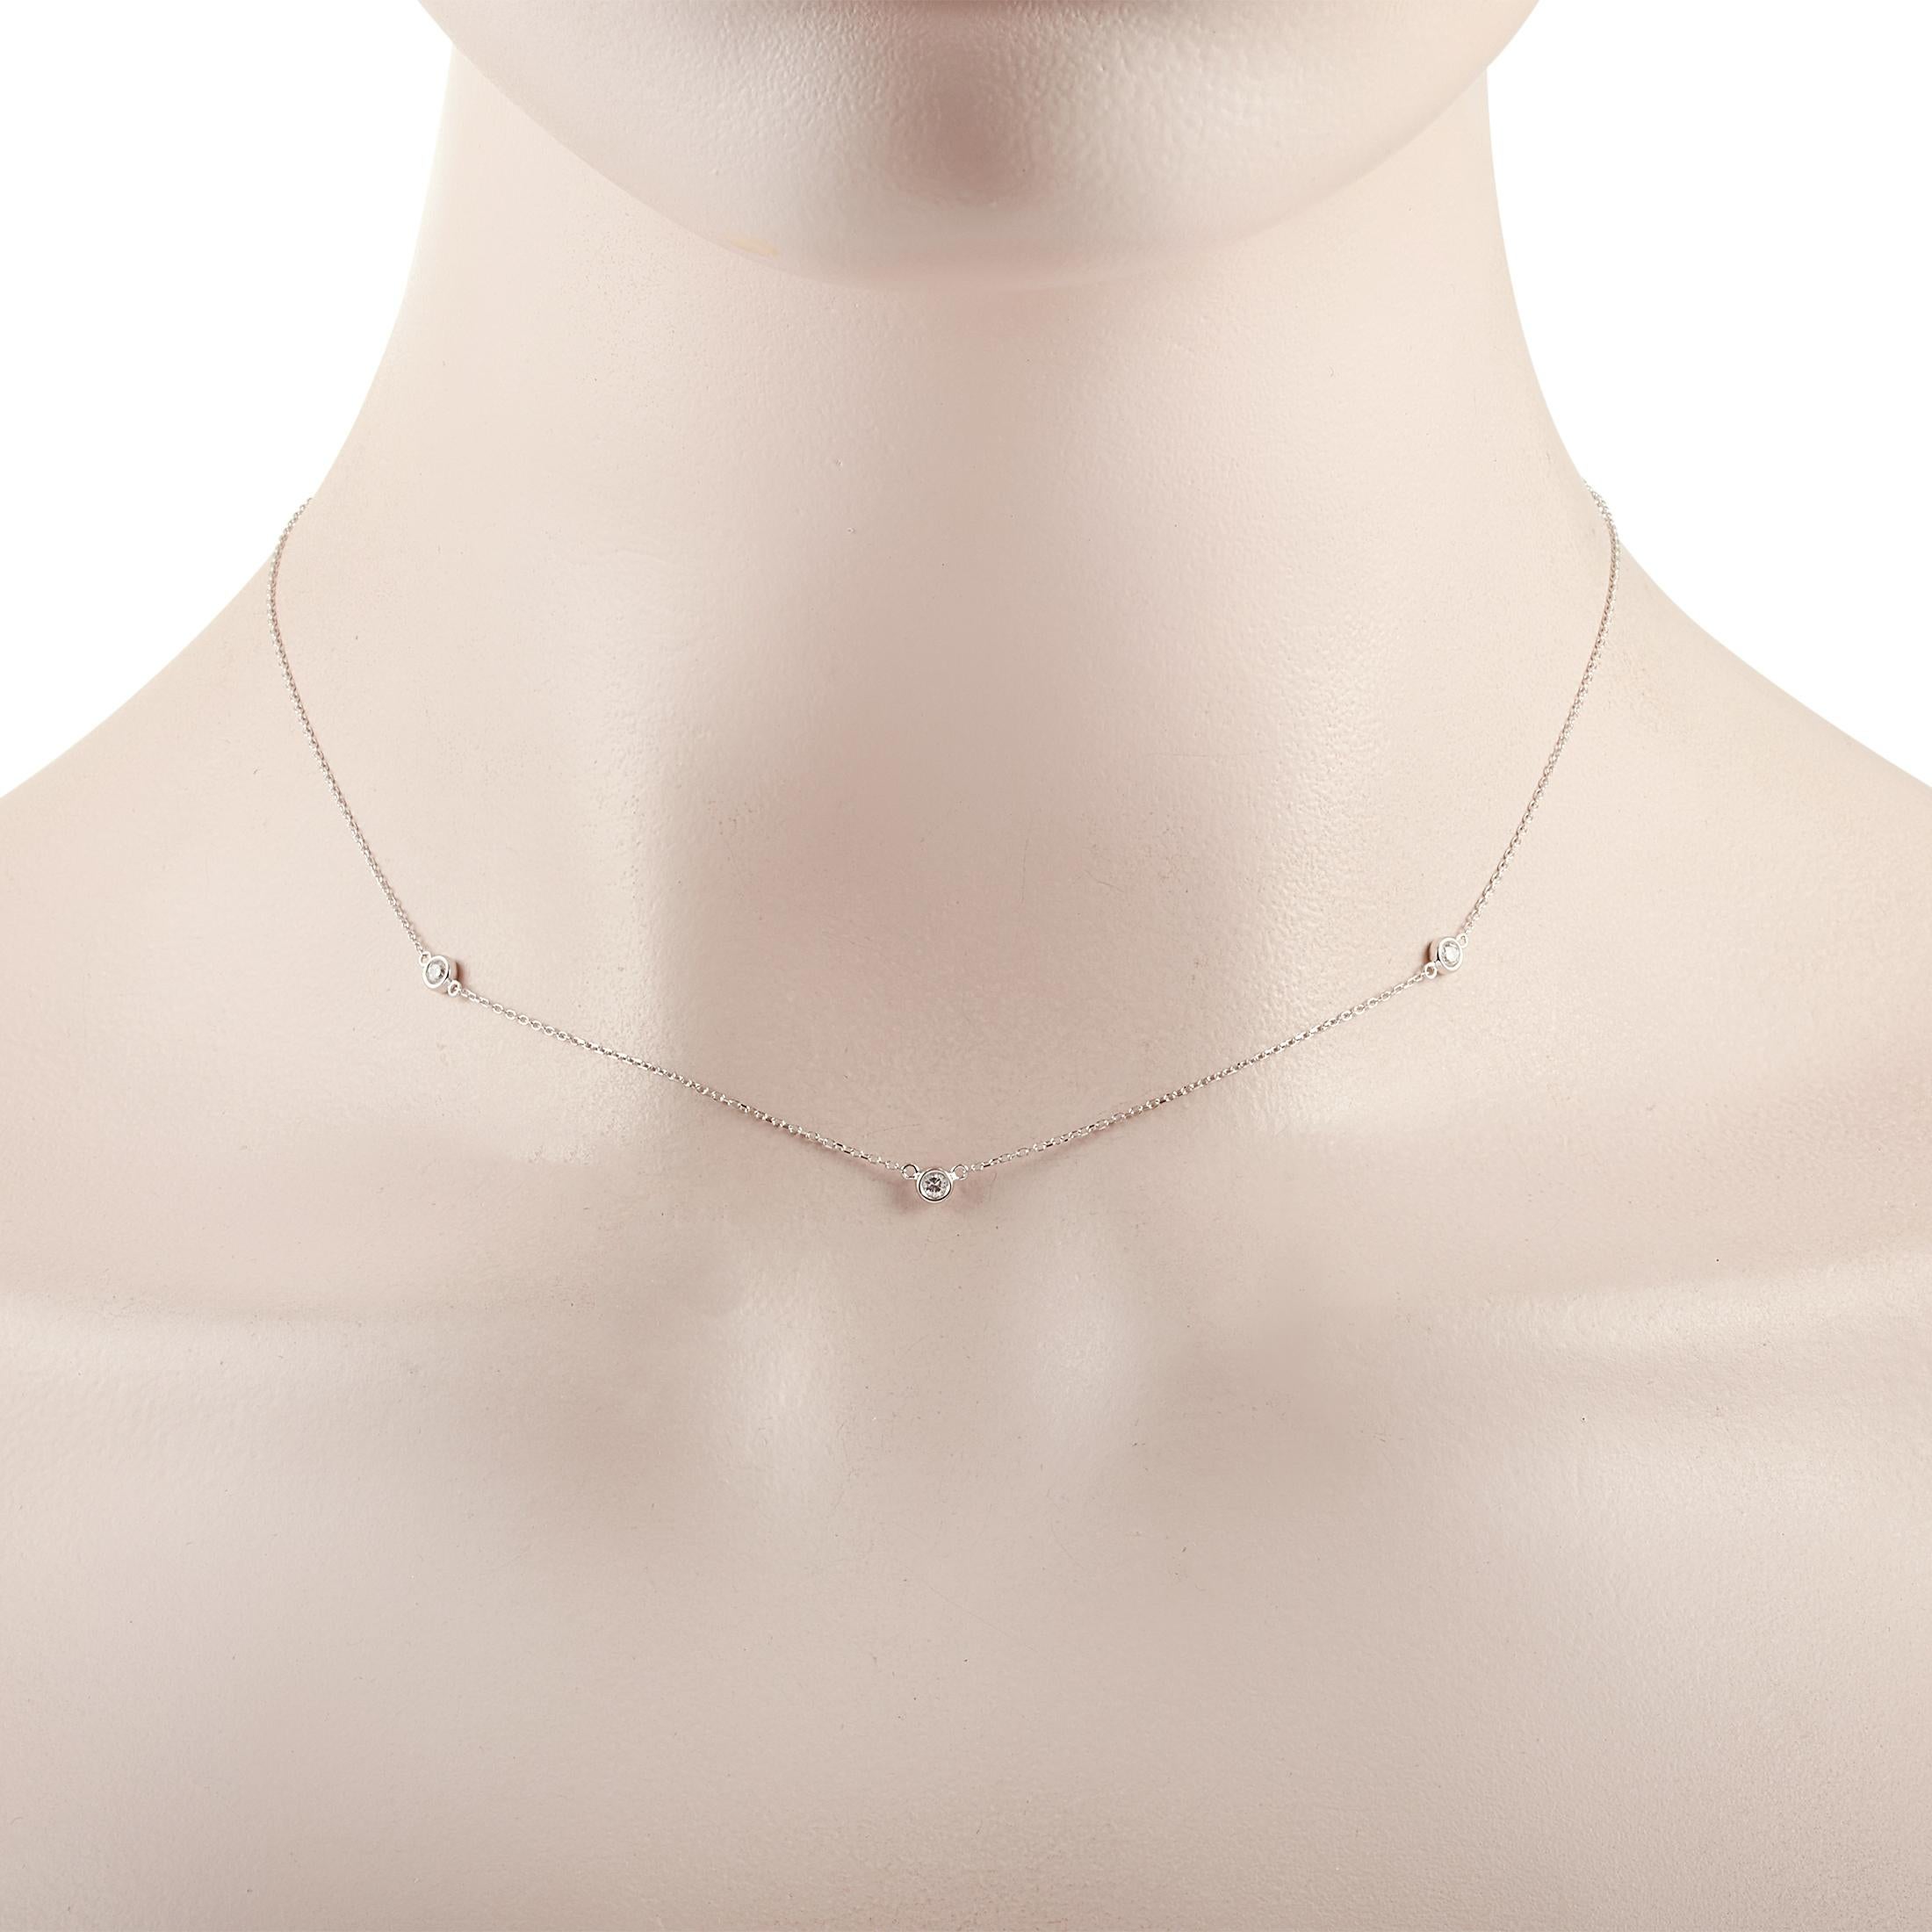 This LB Exclusive necklace is made of 14K white gold and embellished with diamonds that amount to 0.15 carats. The necklace weighs 1.3 grams and measures 16” in length.
 
 Offered in brand new condition, this jewelry piece includes a gift box.
